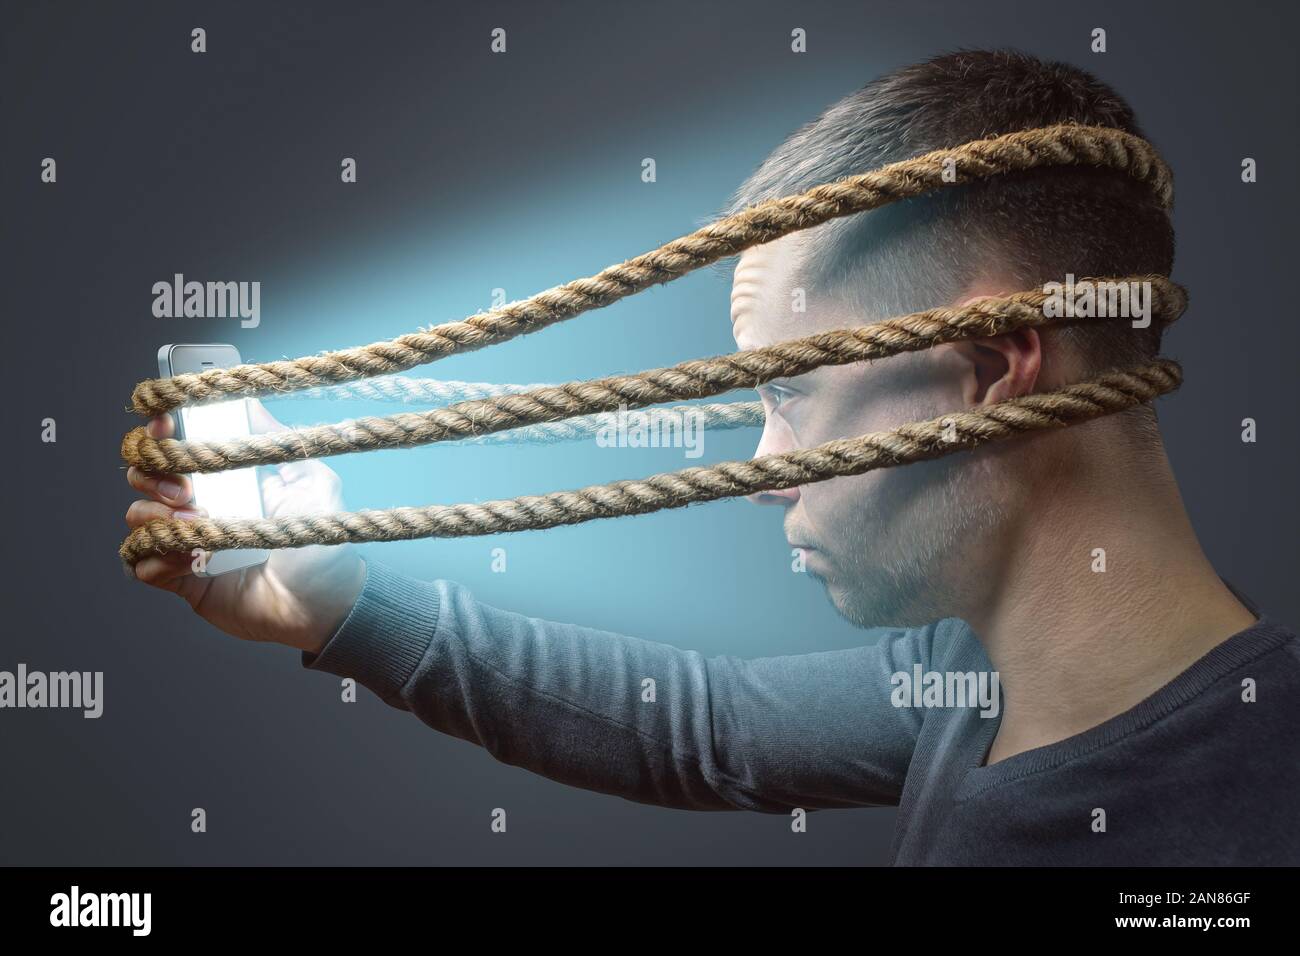 Man tied to his smartphone with a rope Stock Photo